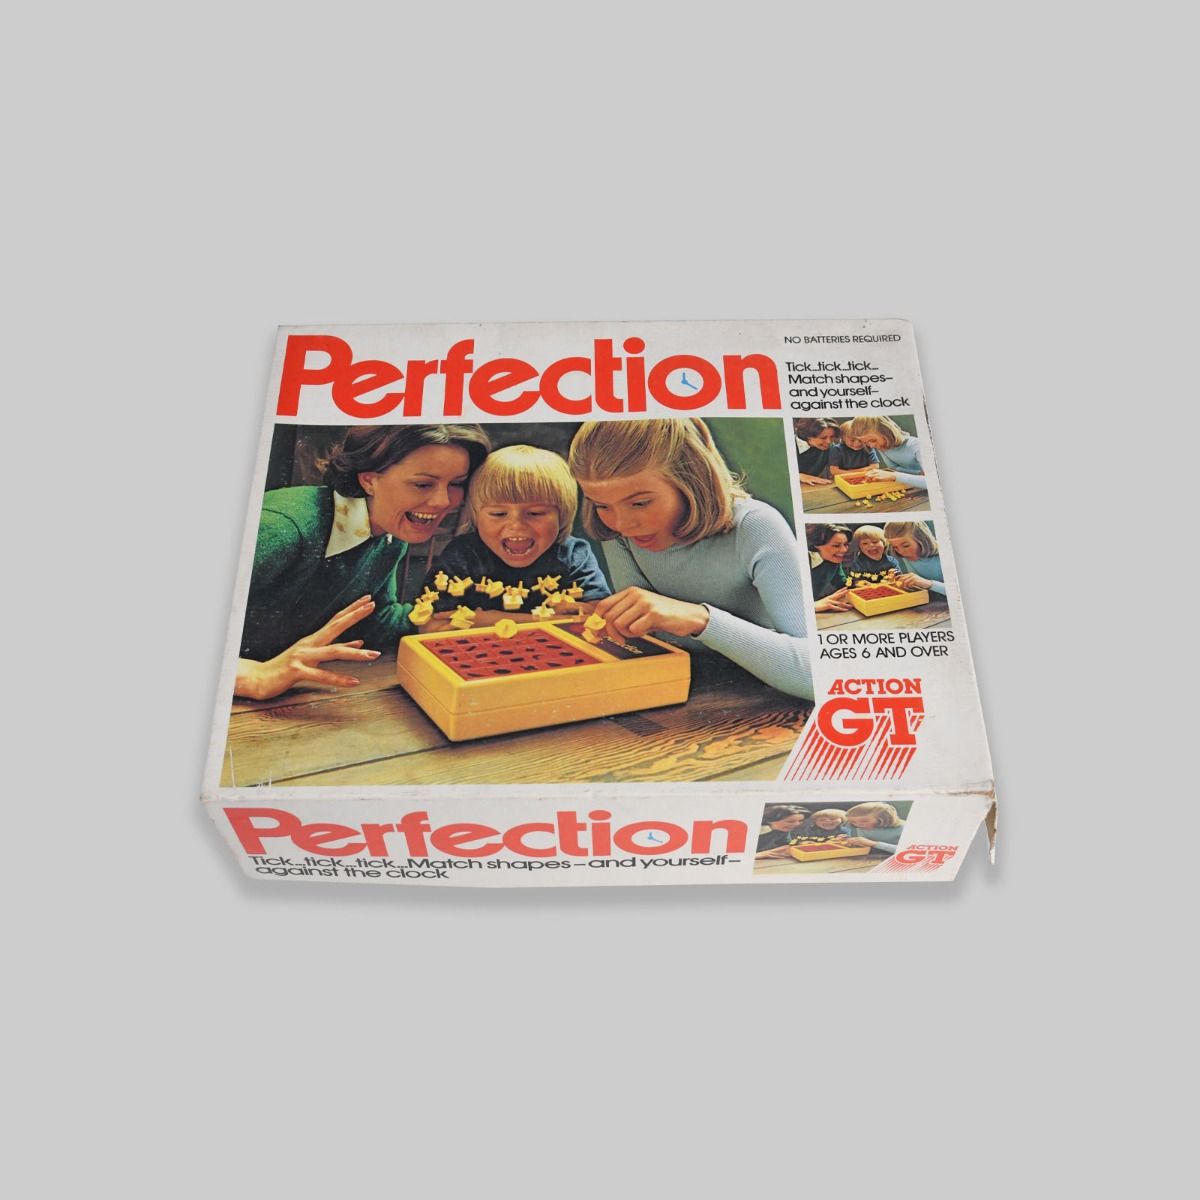 'Perfection' 1980 Board Game